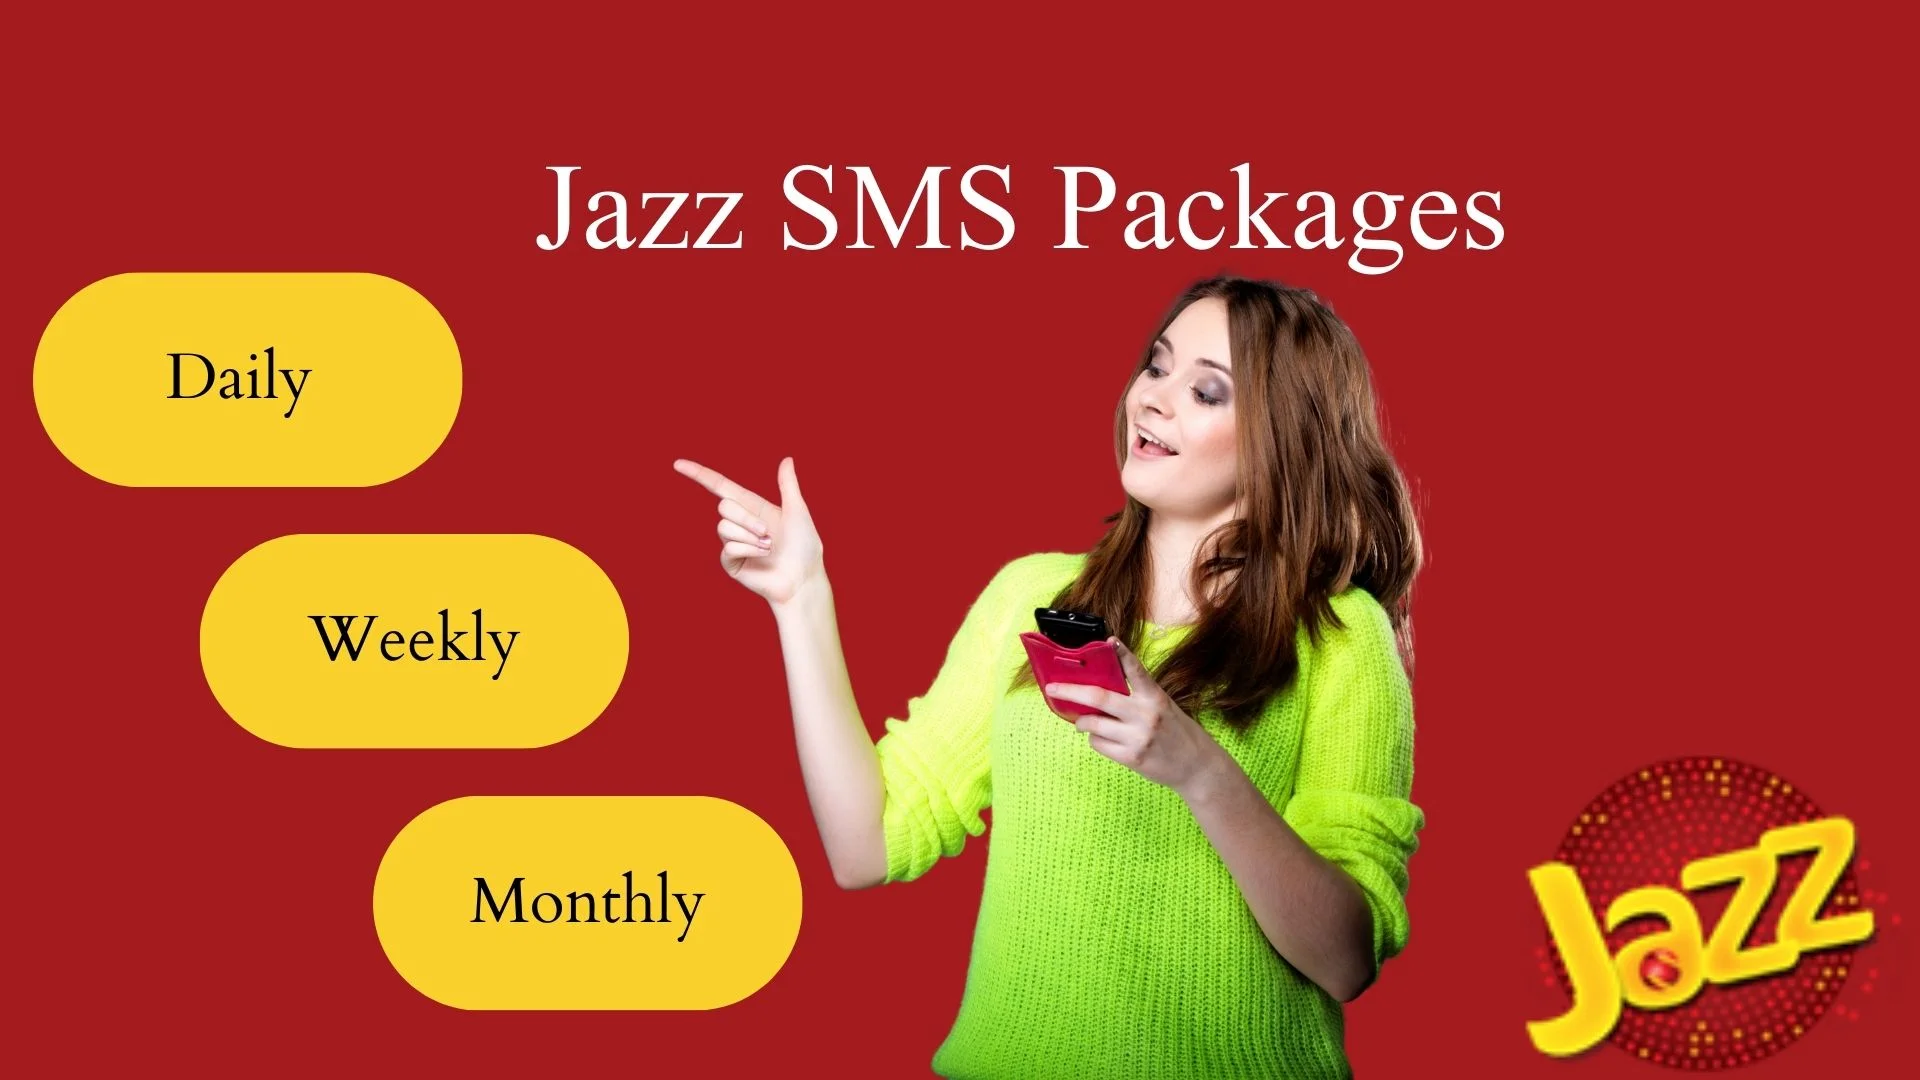 Jazz SMS Packages-Daily,Weekly,Monthly